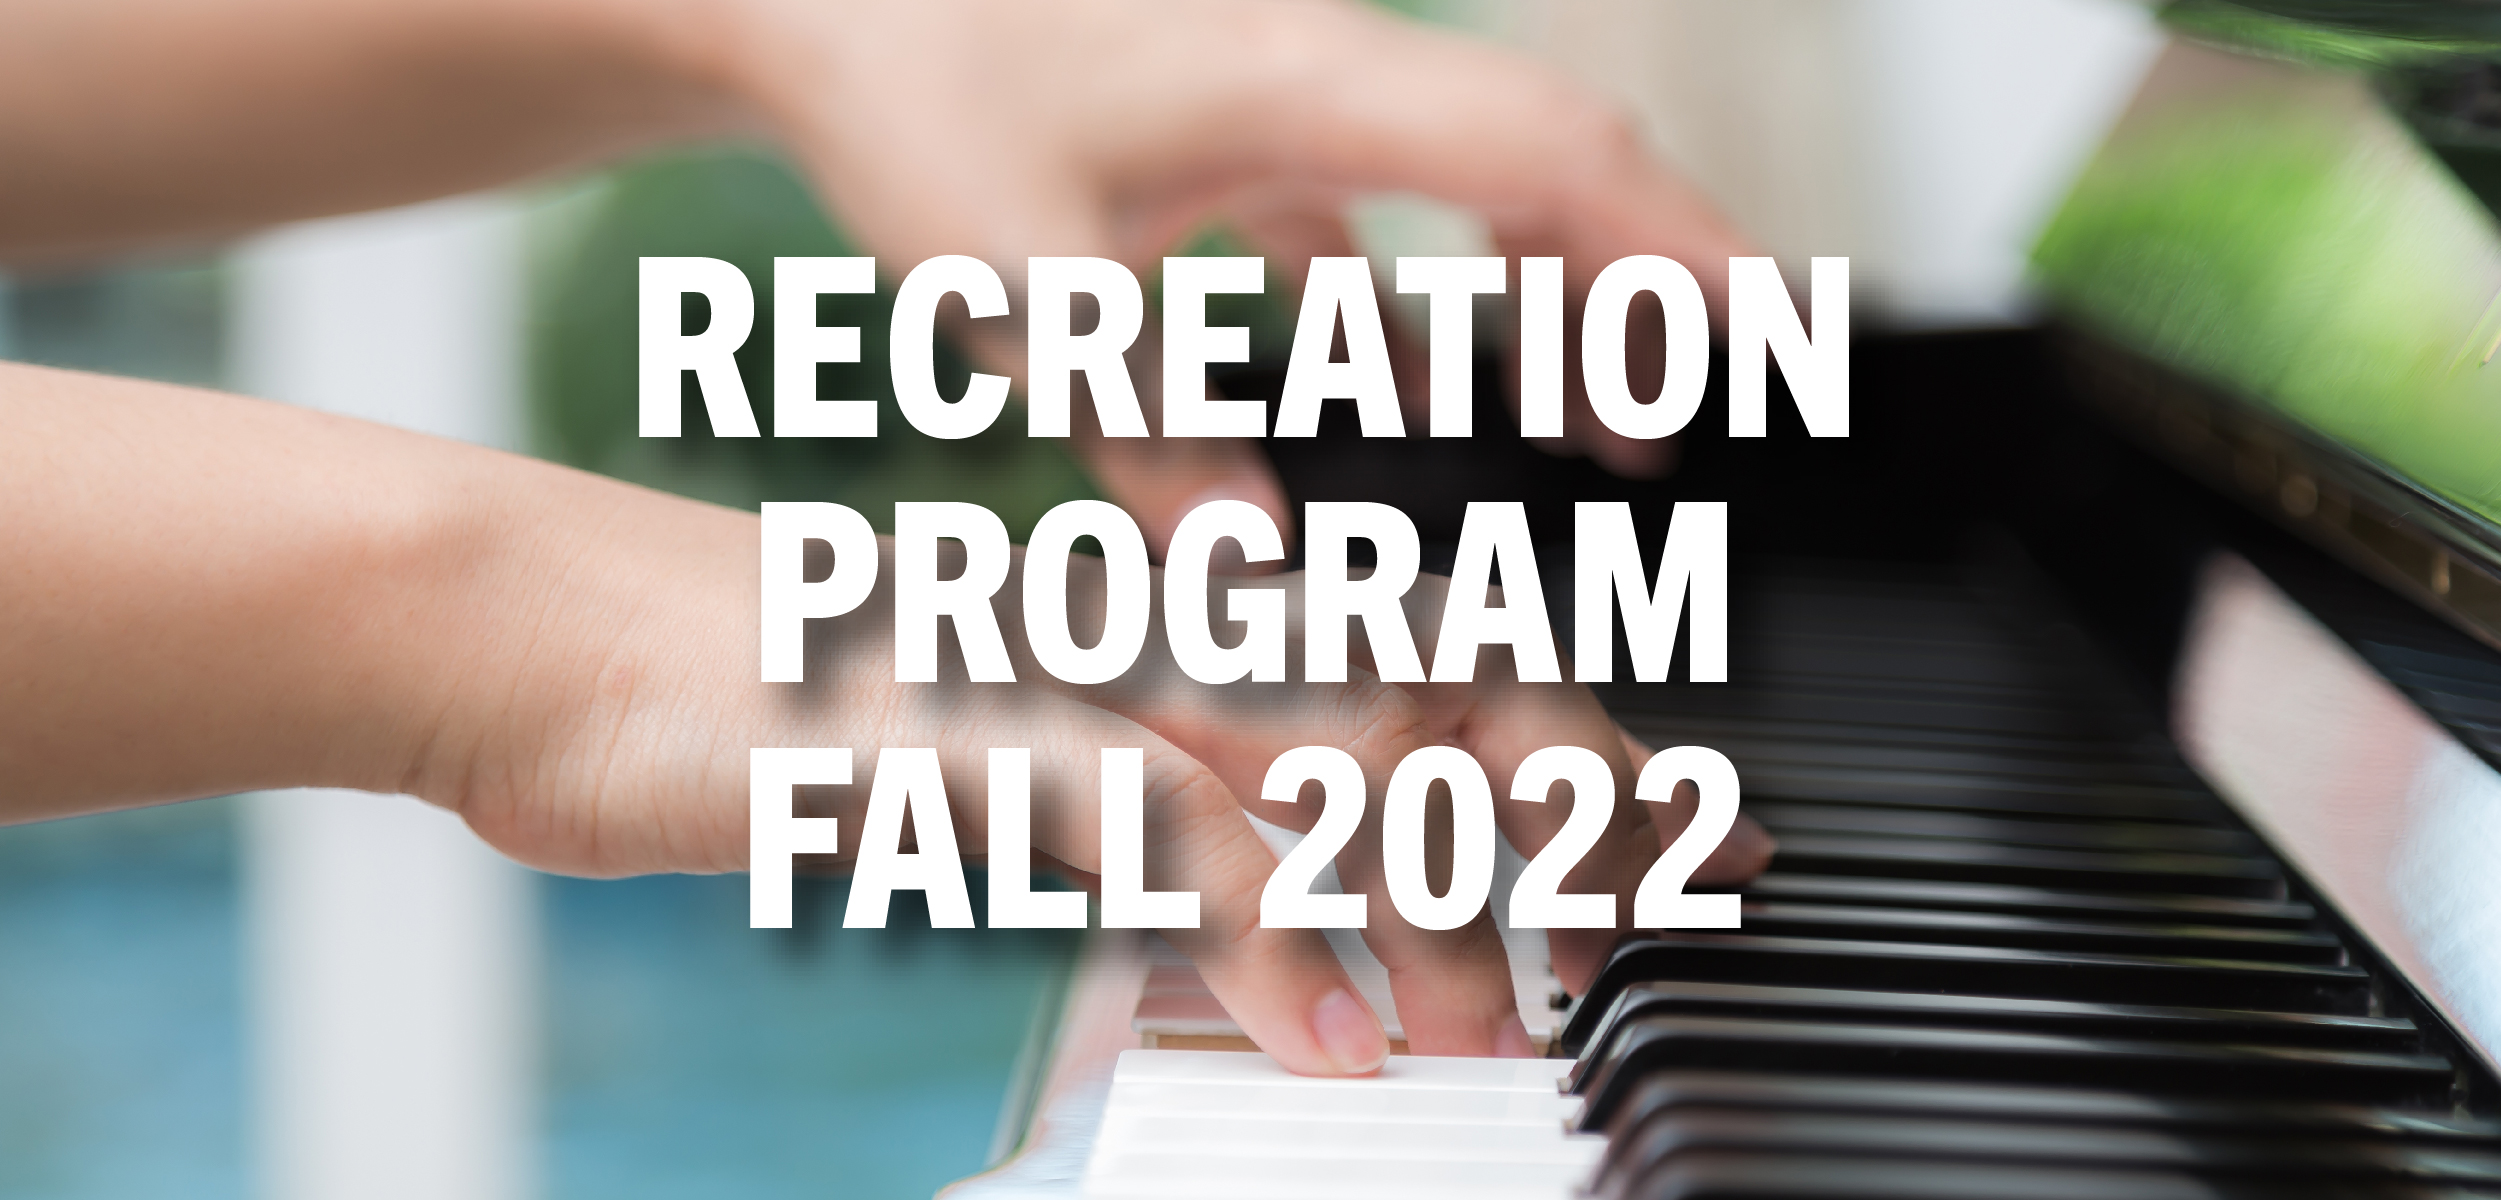 You are currently viewing Recreation program – Fall 2022